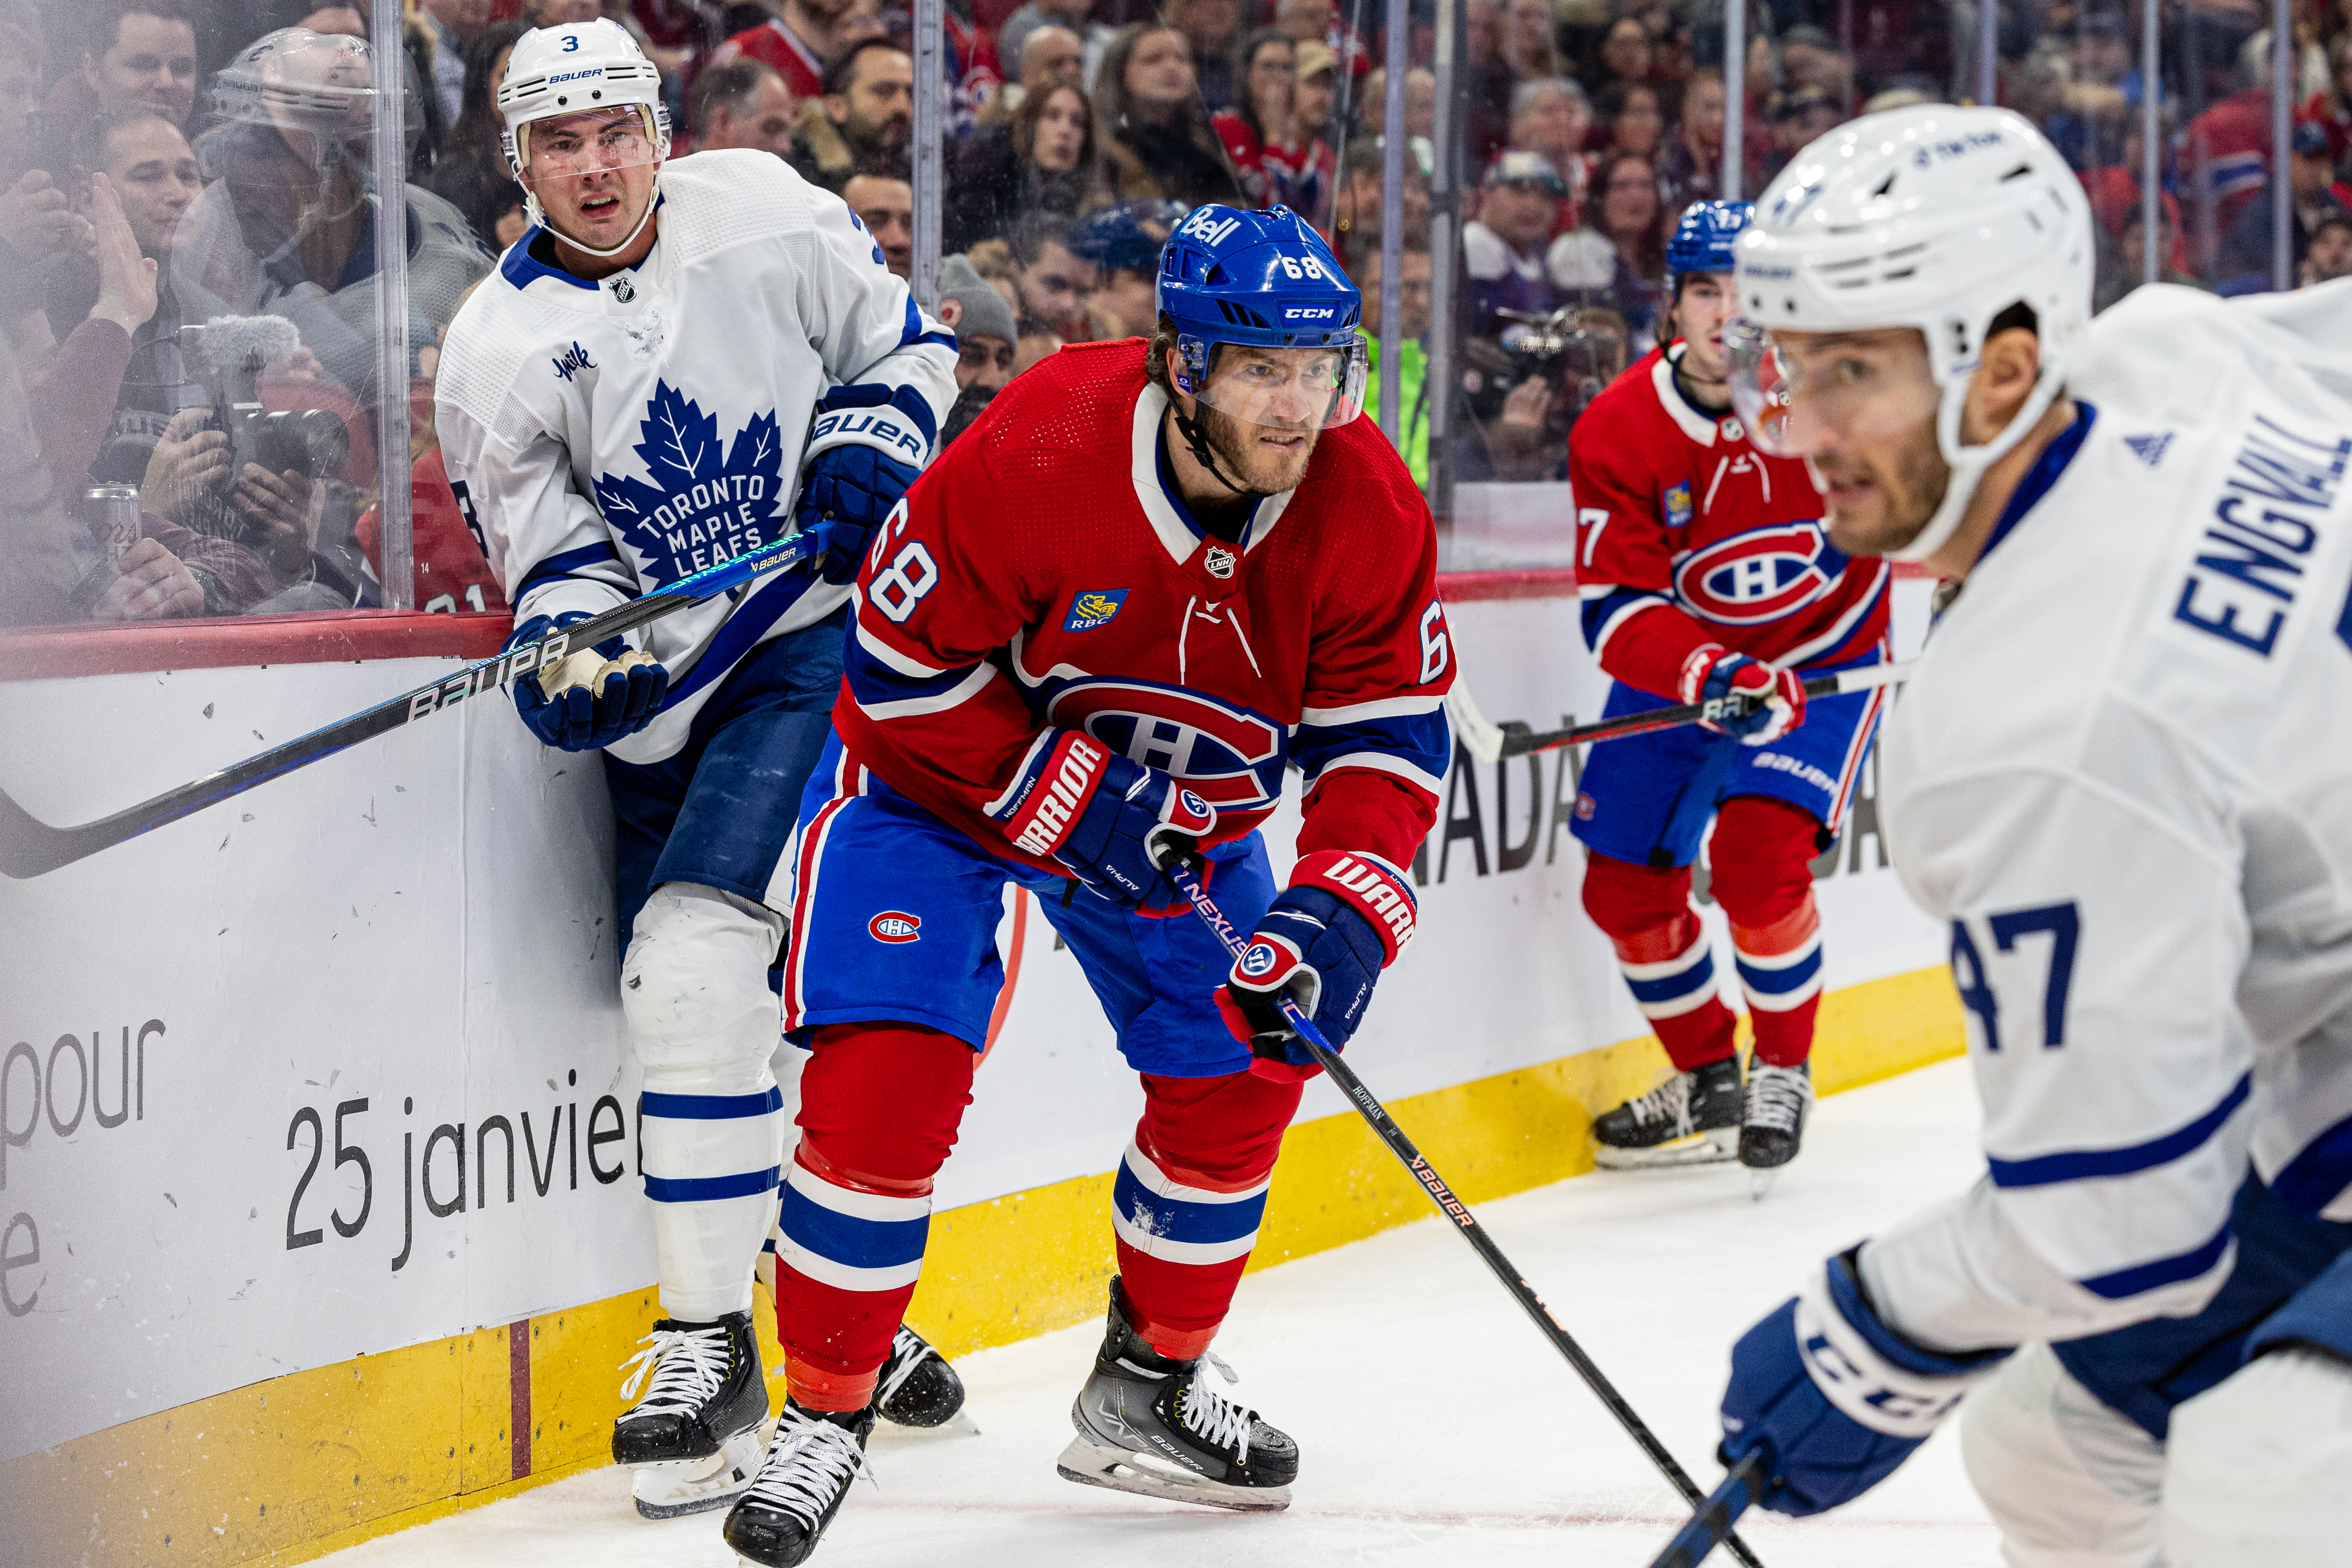 Toronto Maple Leafs v Montreal Canadiens